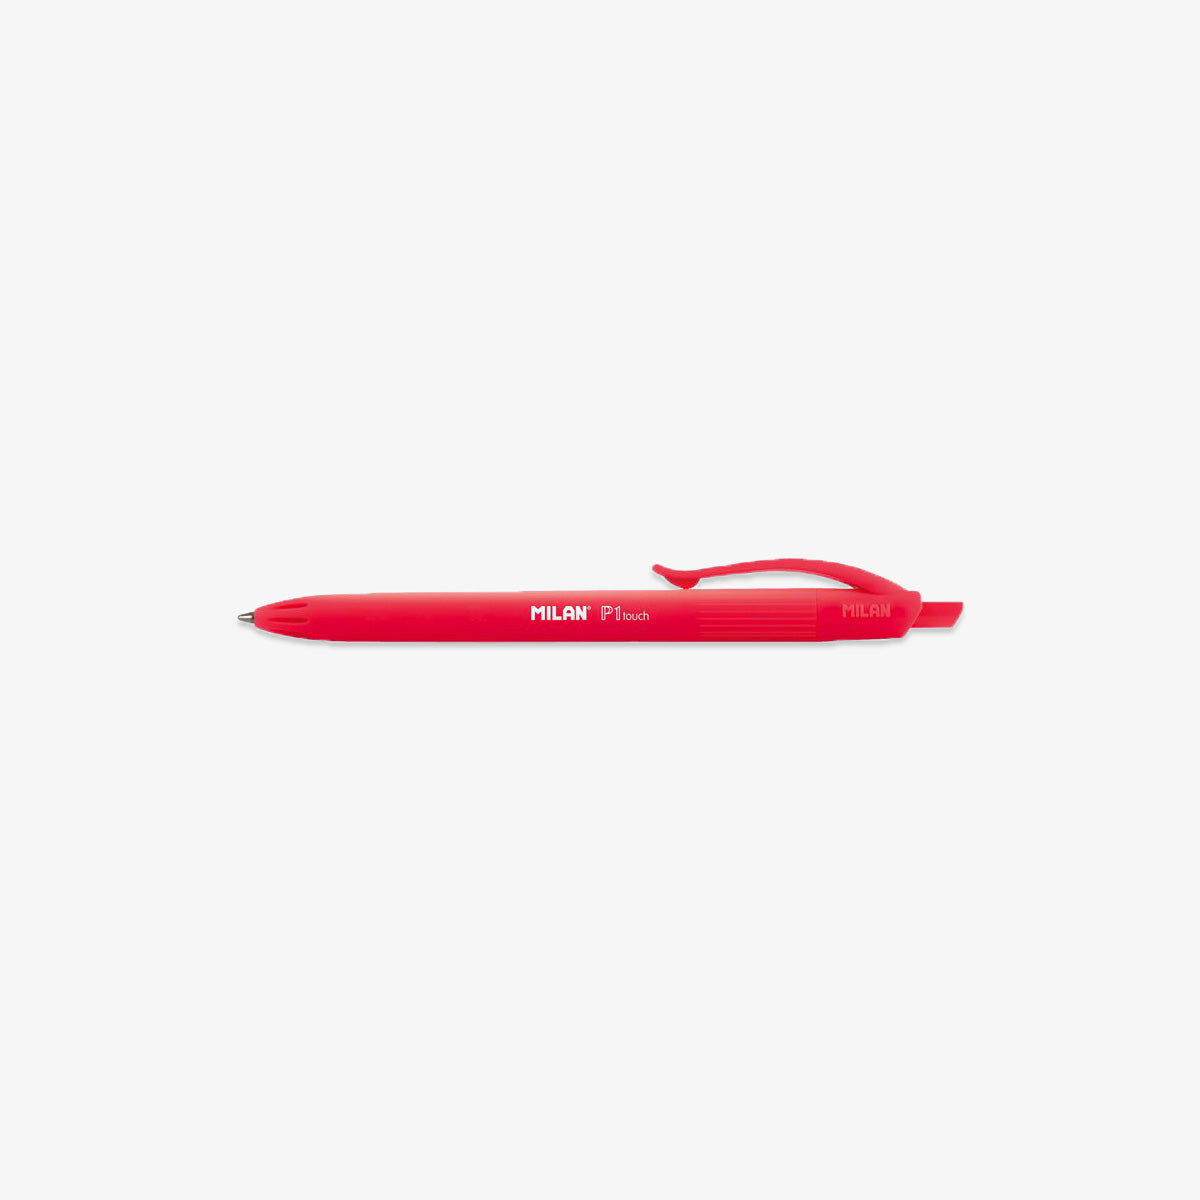 MILAN P1 TOUCH PEN // RED